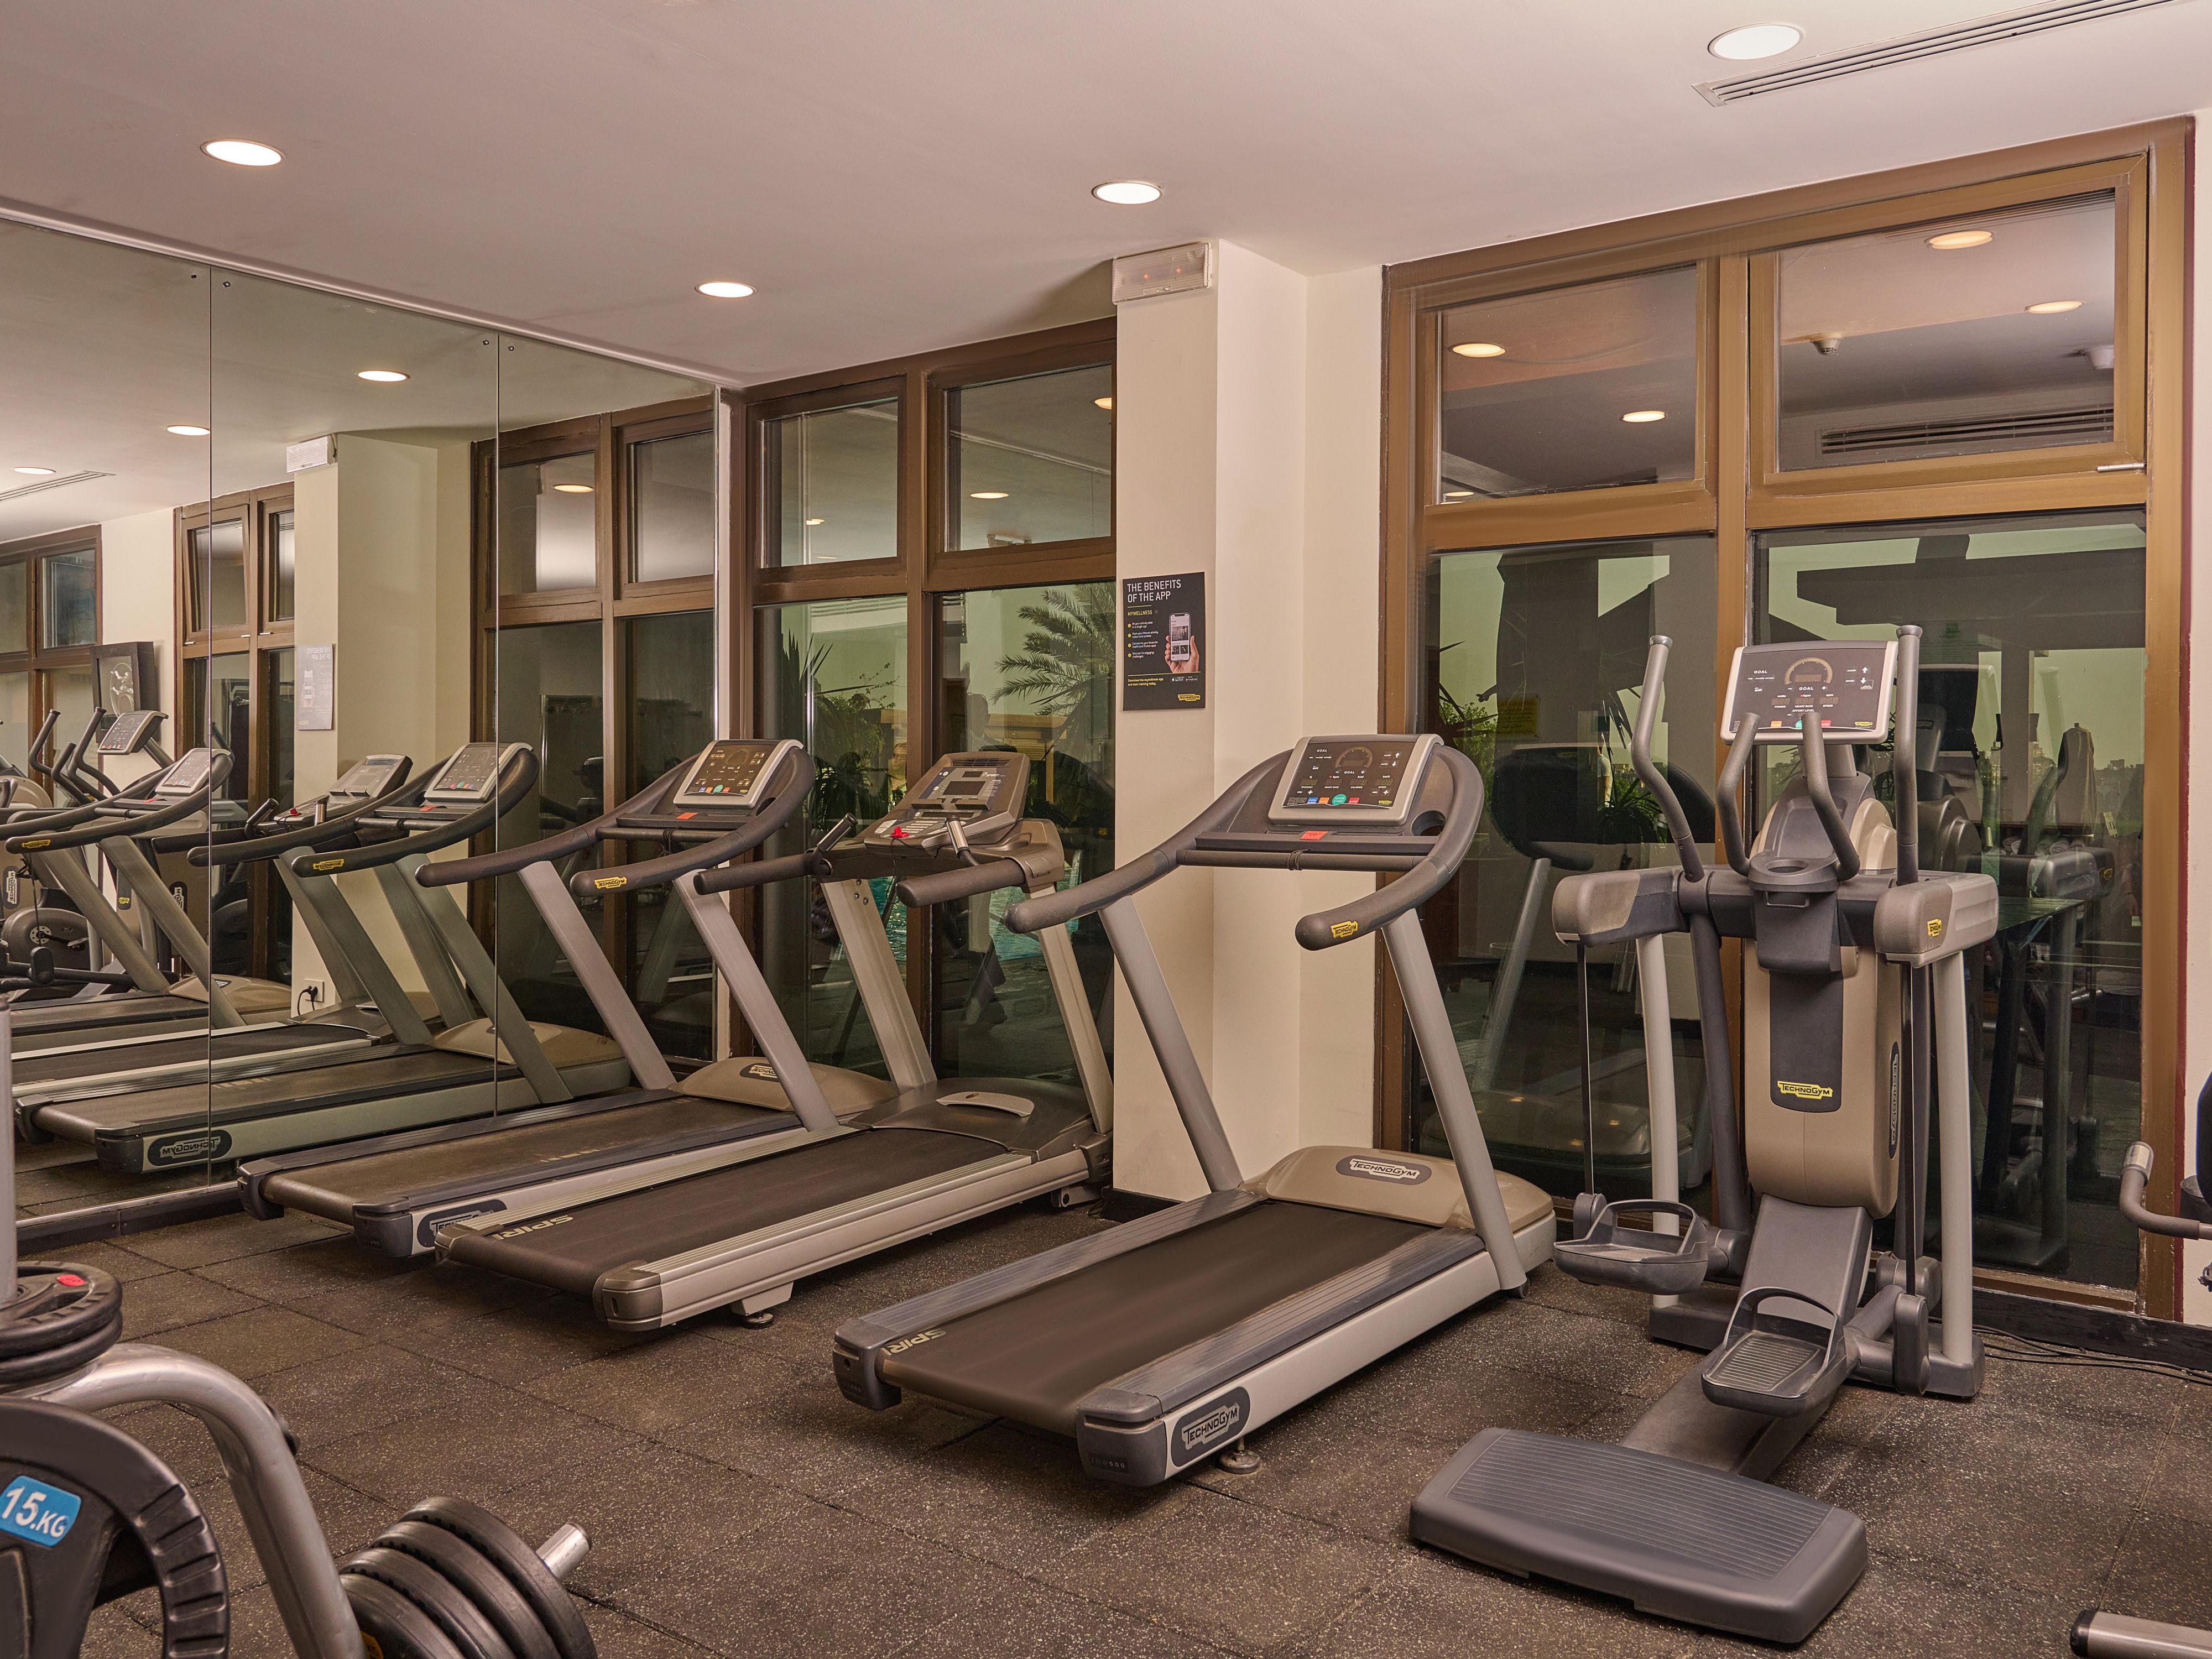 Being on vacation or business trip that doesn't mean that you don't stay fit. Enjoy your stay at Holiday Inn Cairo Maadi and don't forget to workout at our very own gym that overlooks the magnificent river Nile. The gym is fully equipped with cardio and strength machines. Nothing beats working out with a breathtaking view.